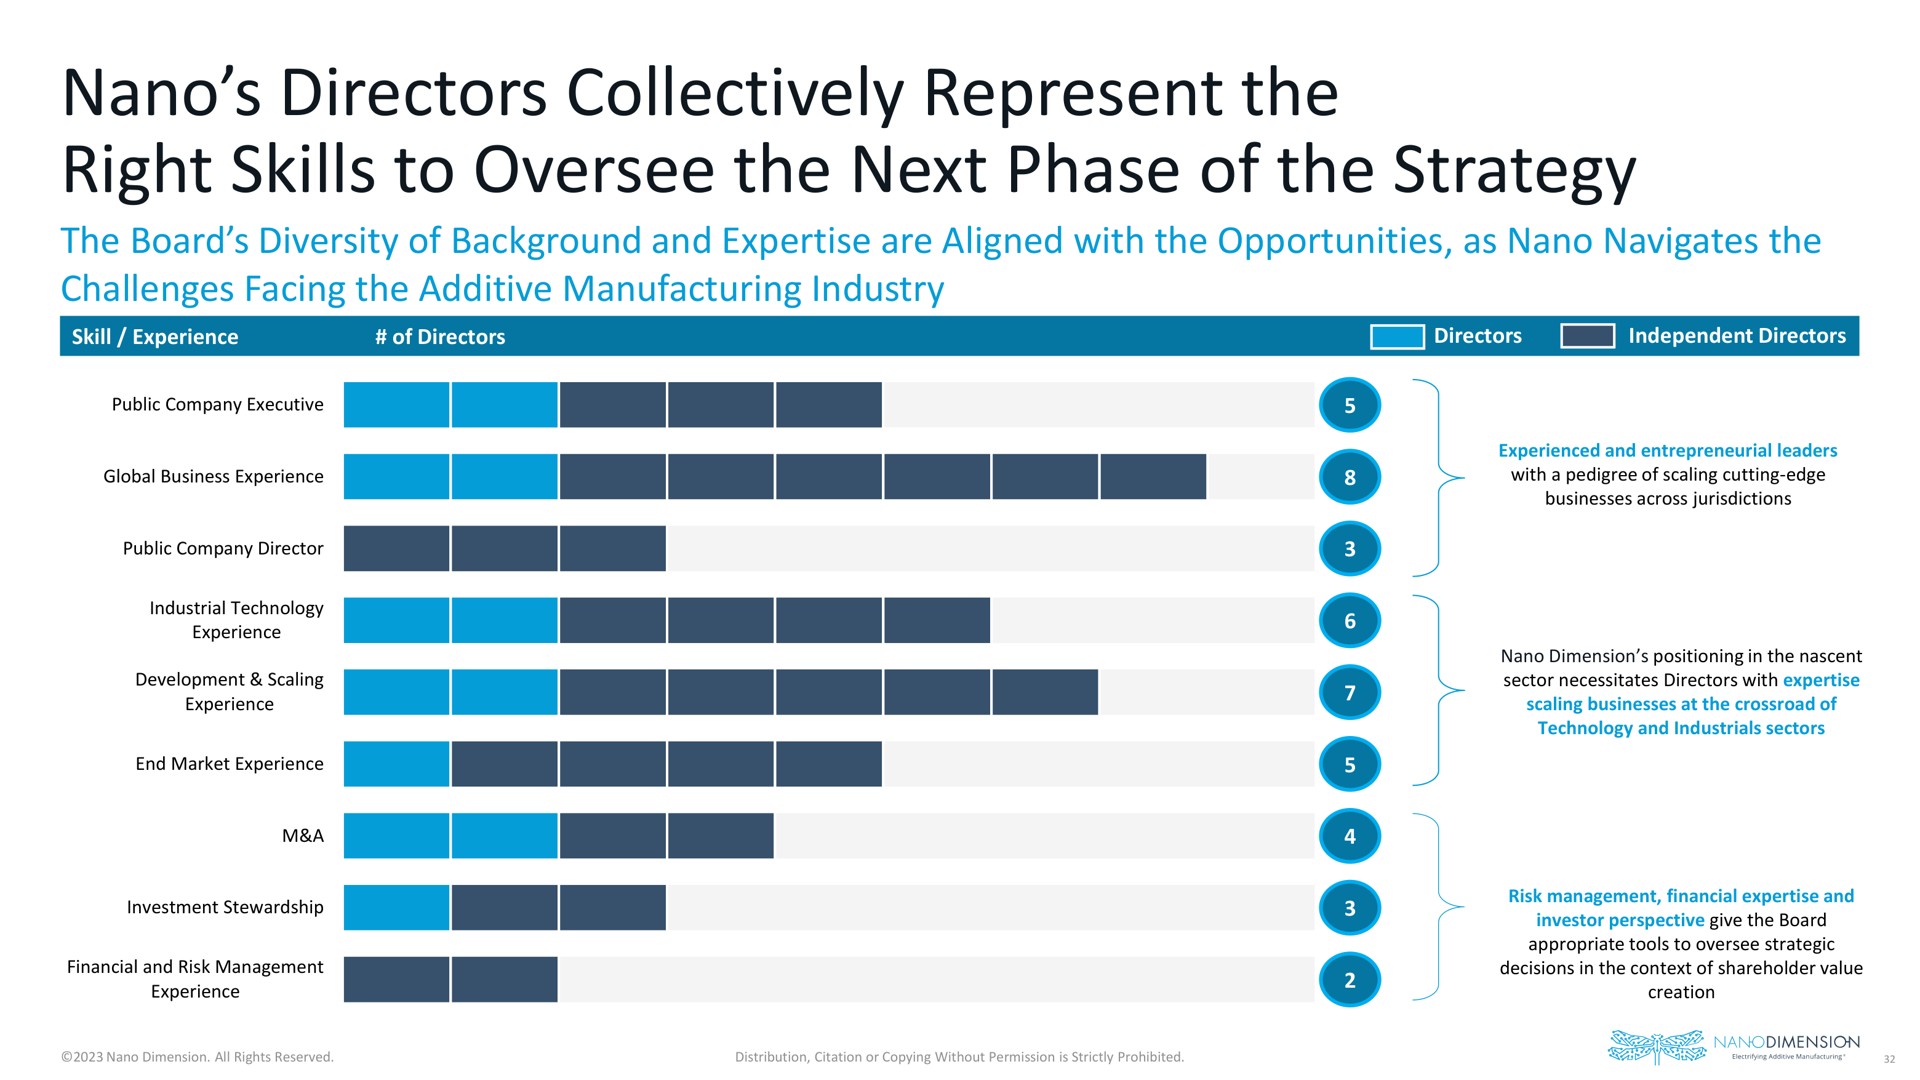 directors collectively represent the right skills to oversee the next phase of the strategy | Nano Dimension